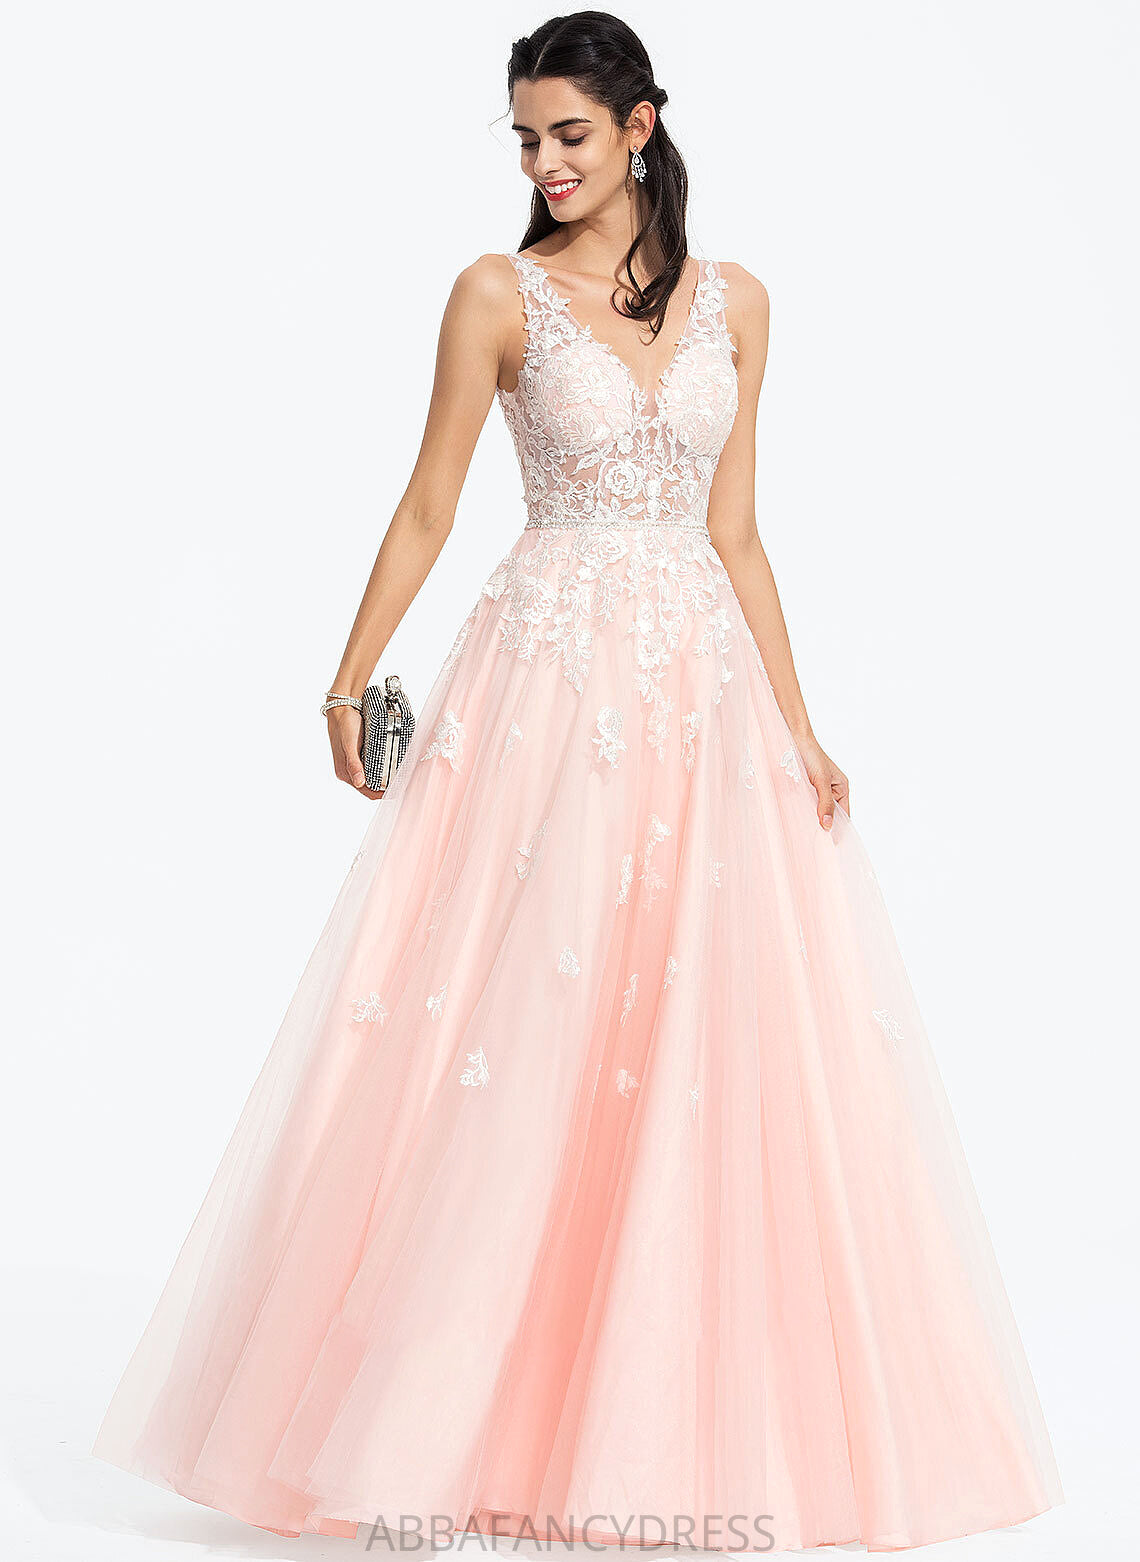 Tulle Wedding With Clare Beading Dress Wedding Dresses Floor-Length V-neck Ball-Gown/Princess Sequins